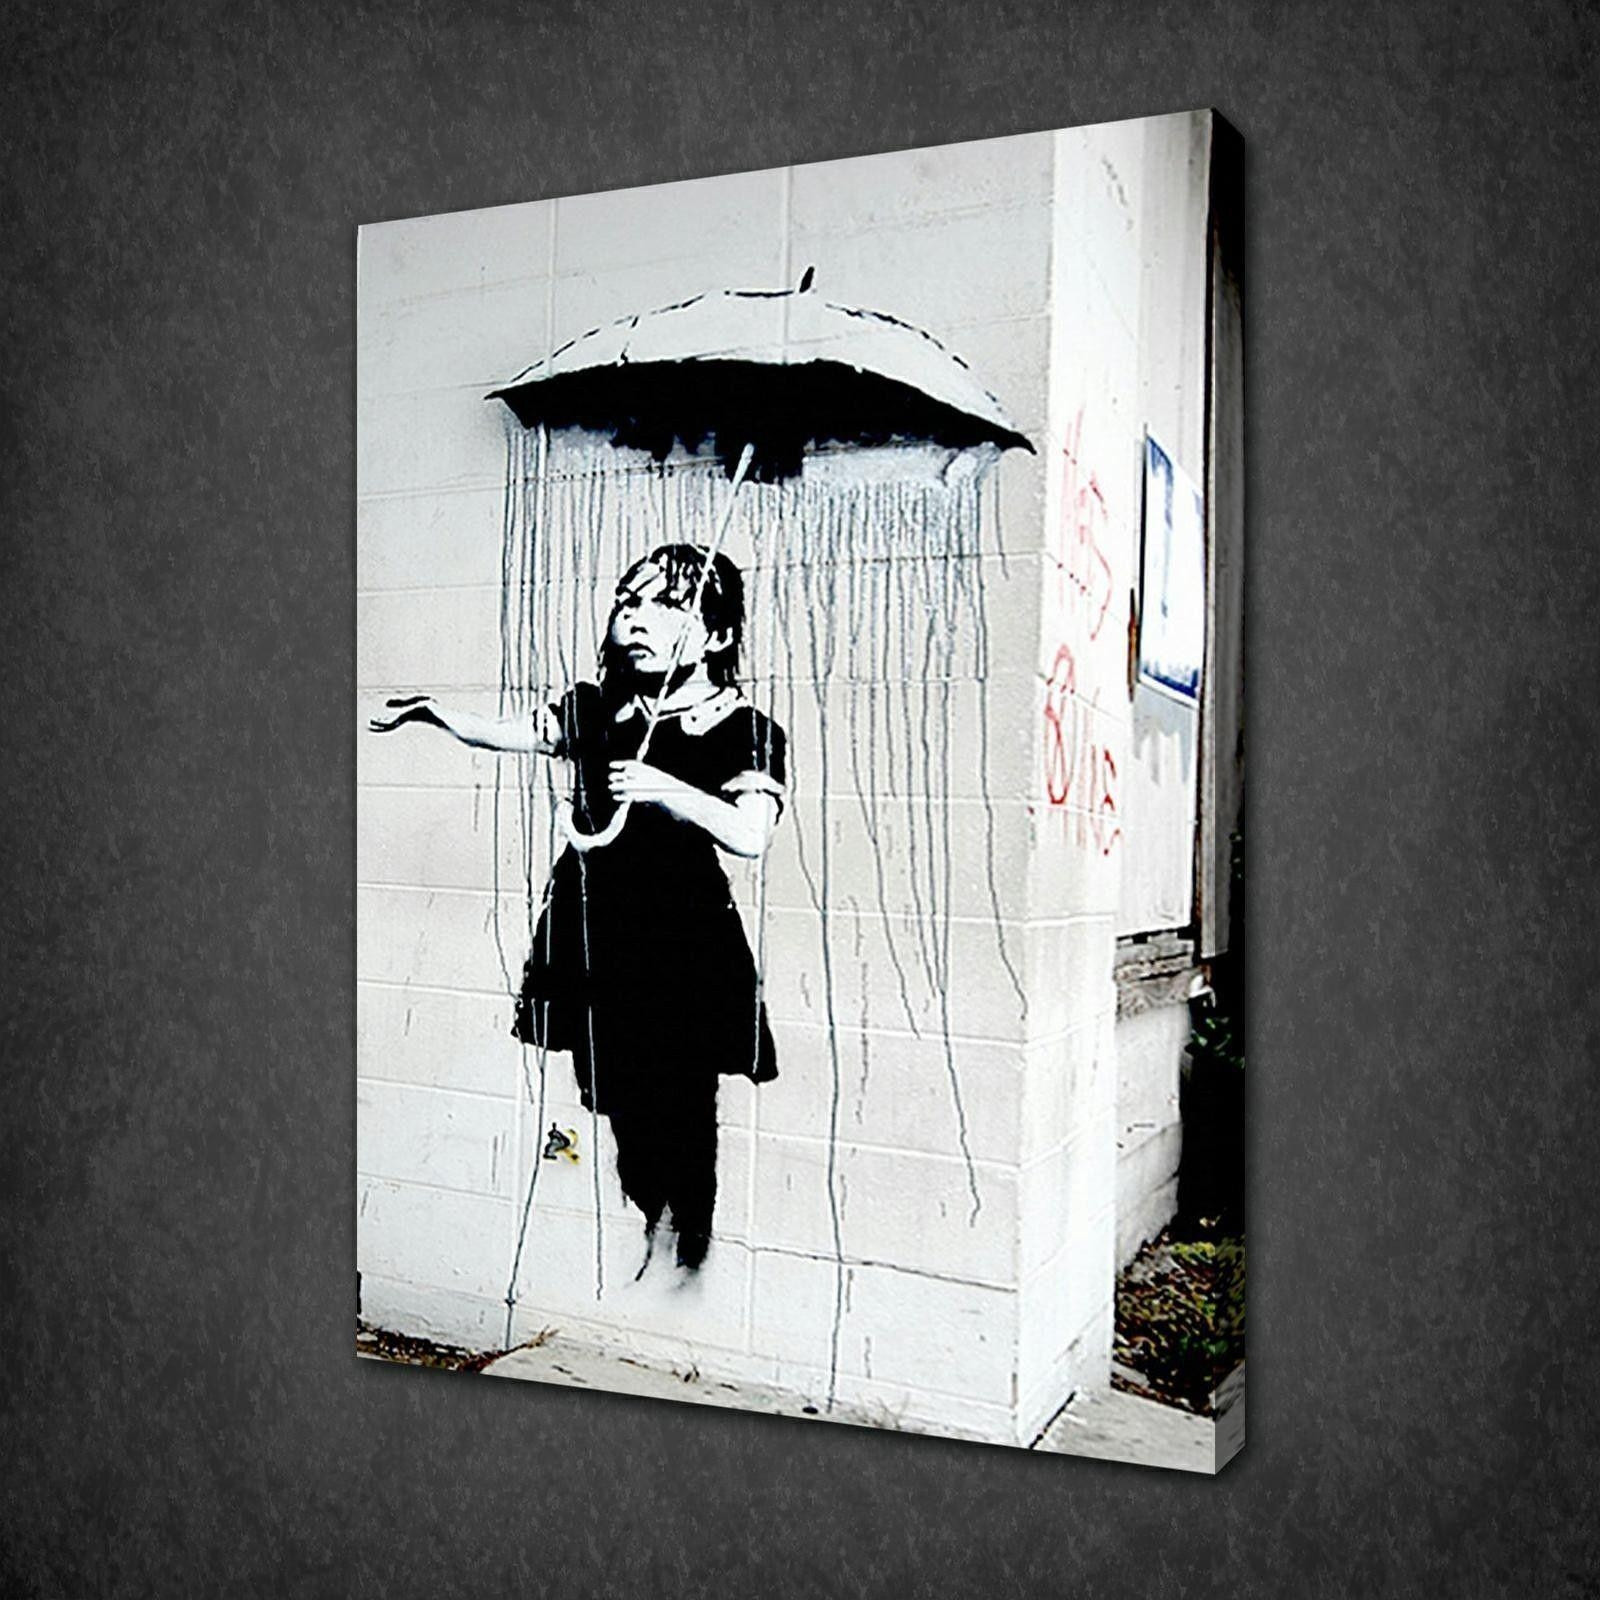 Best ideas about Banksy Wall Art . Save or Pin 20 Inspirations Banksy Wall Art Canvas Now.